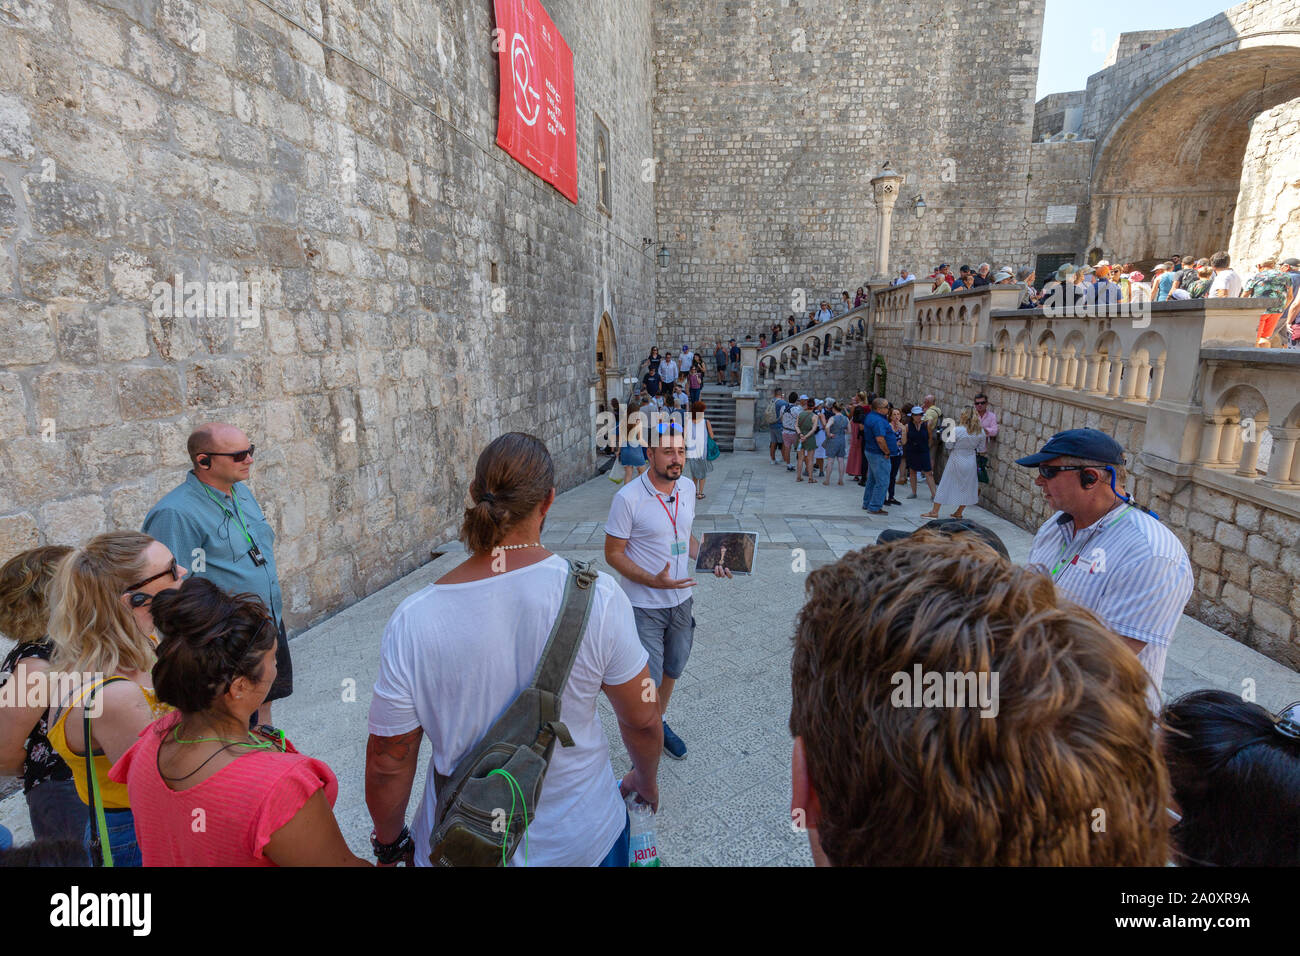 Dubrovnik Game of Thrones; tourists who are fans of the TV series on a guided tour of the locations used, Dubrovnik old town, Dubrovnik Croatia Europe Stock Photo